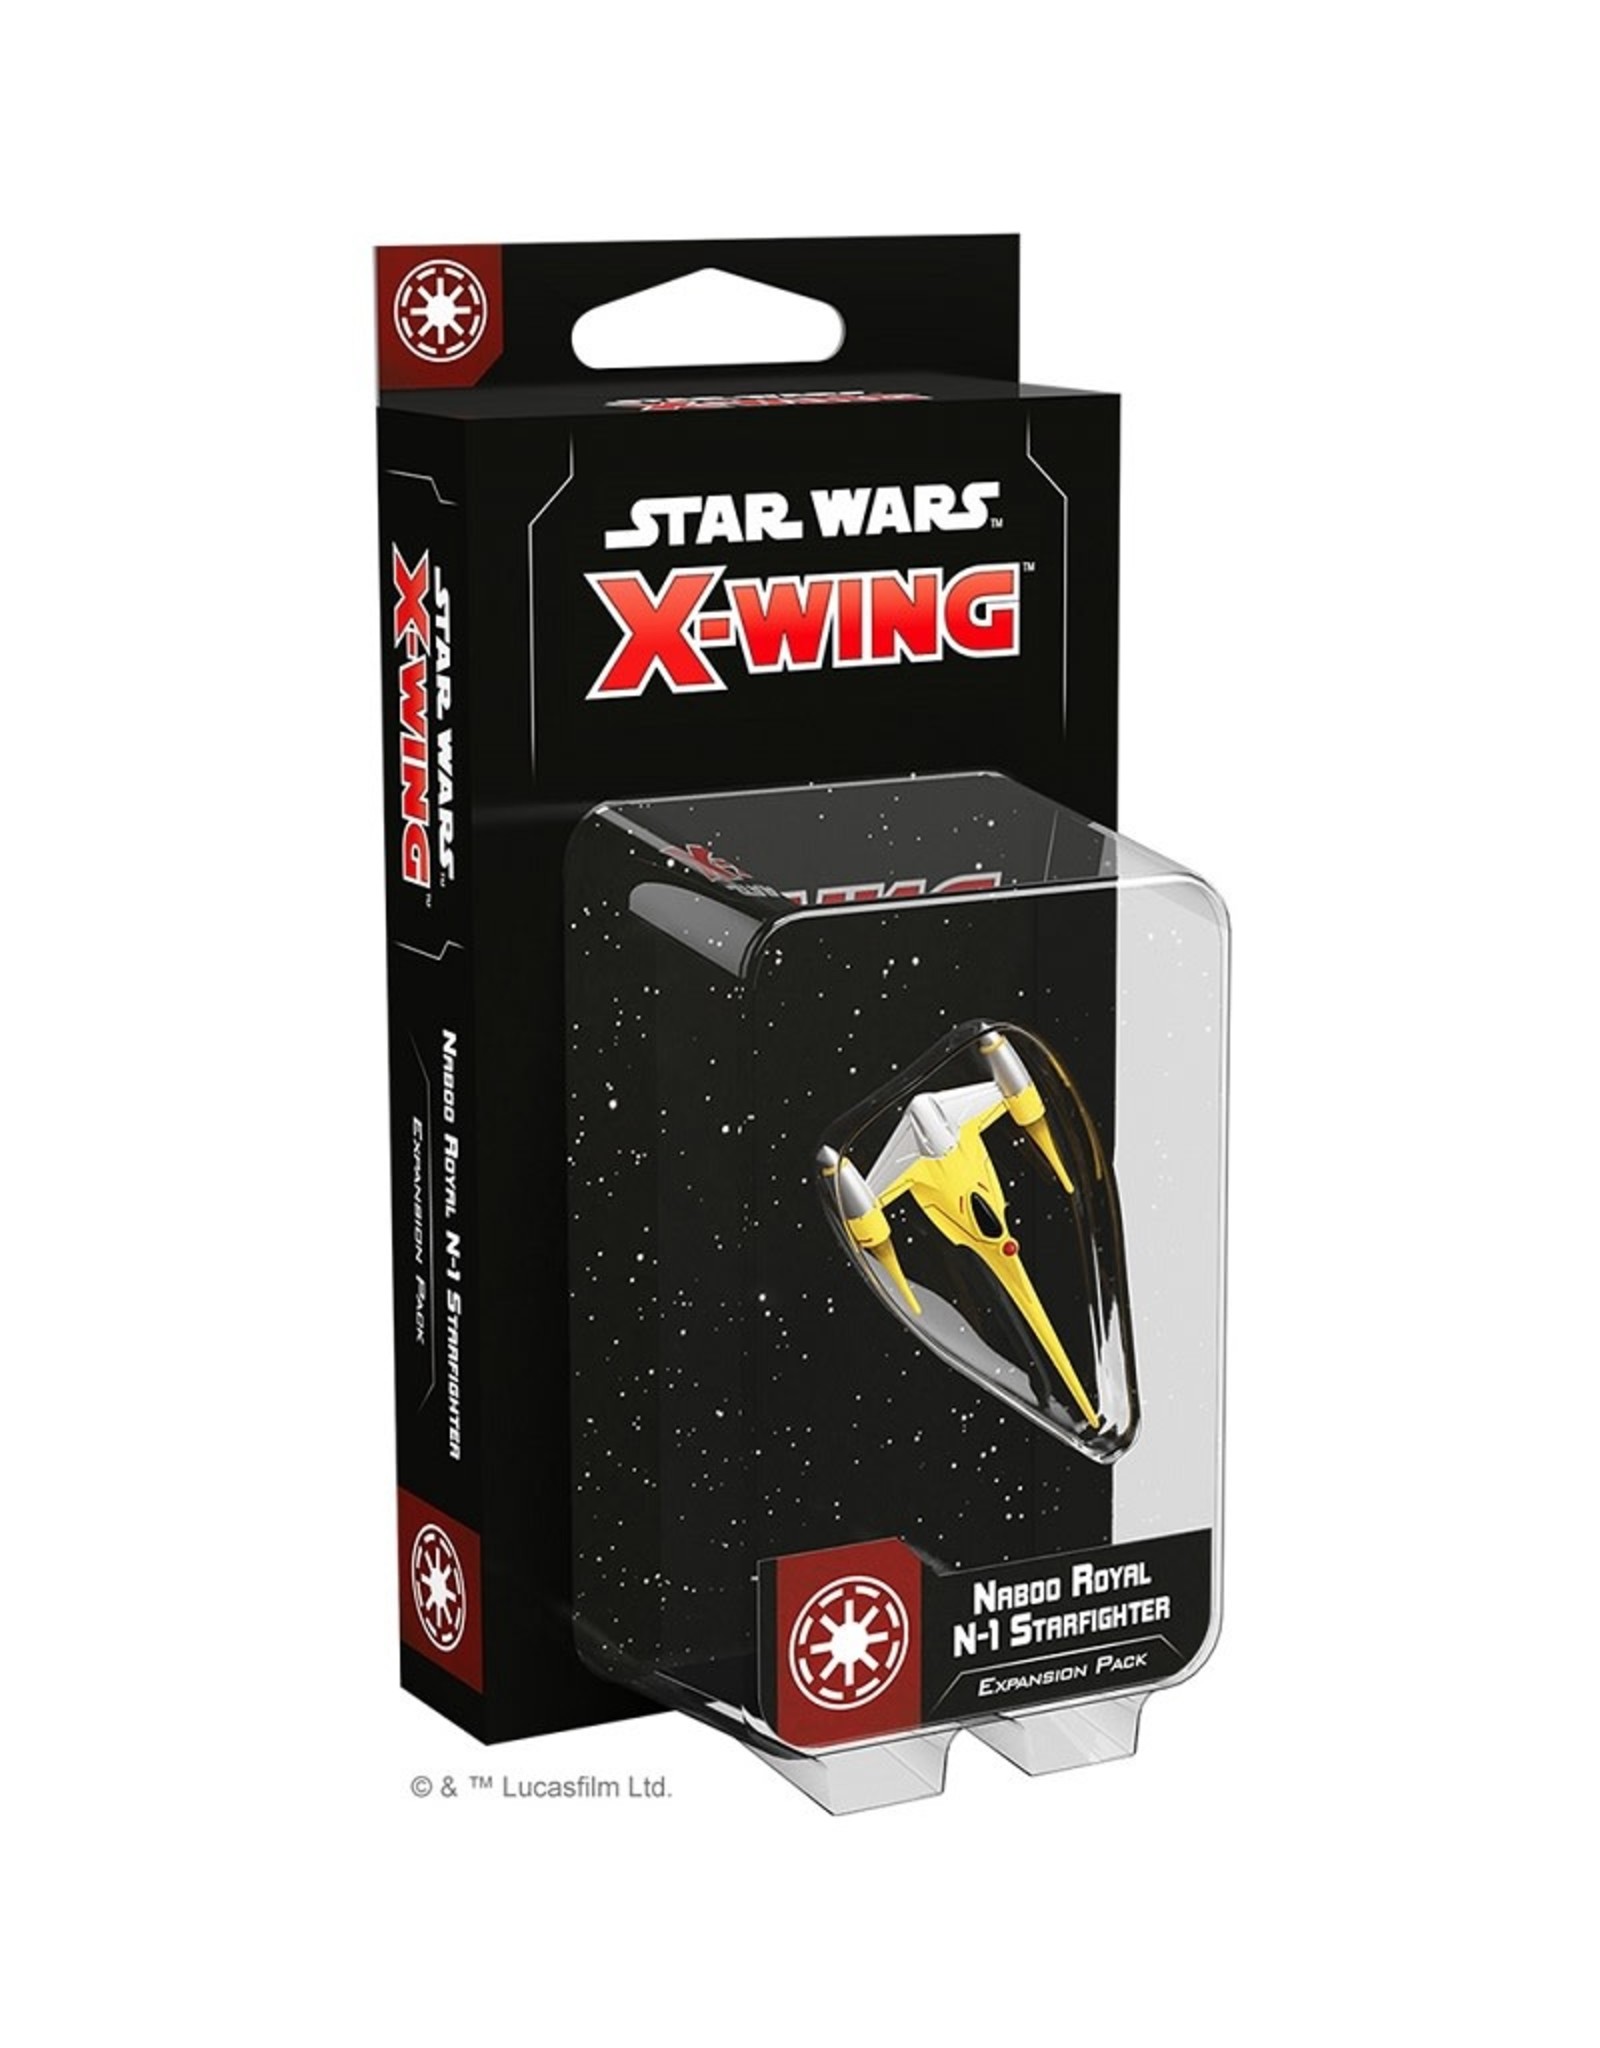 Atomic Mass Games Star Wars X-Wing: Naboo Royal N-1 Starfighter - 2nd Edition